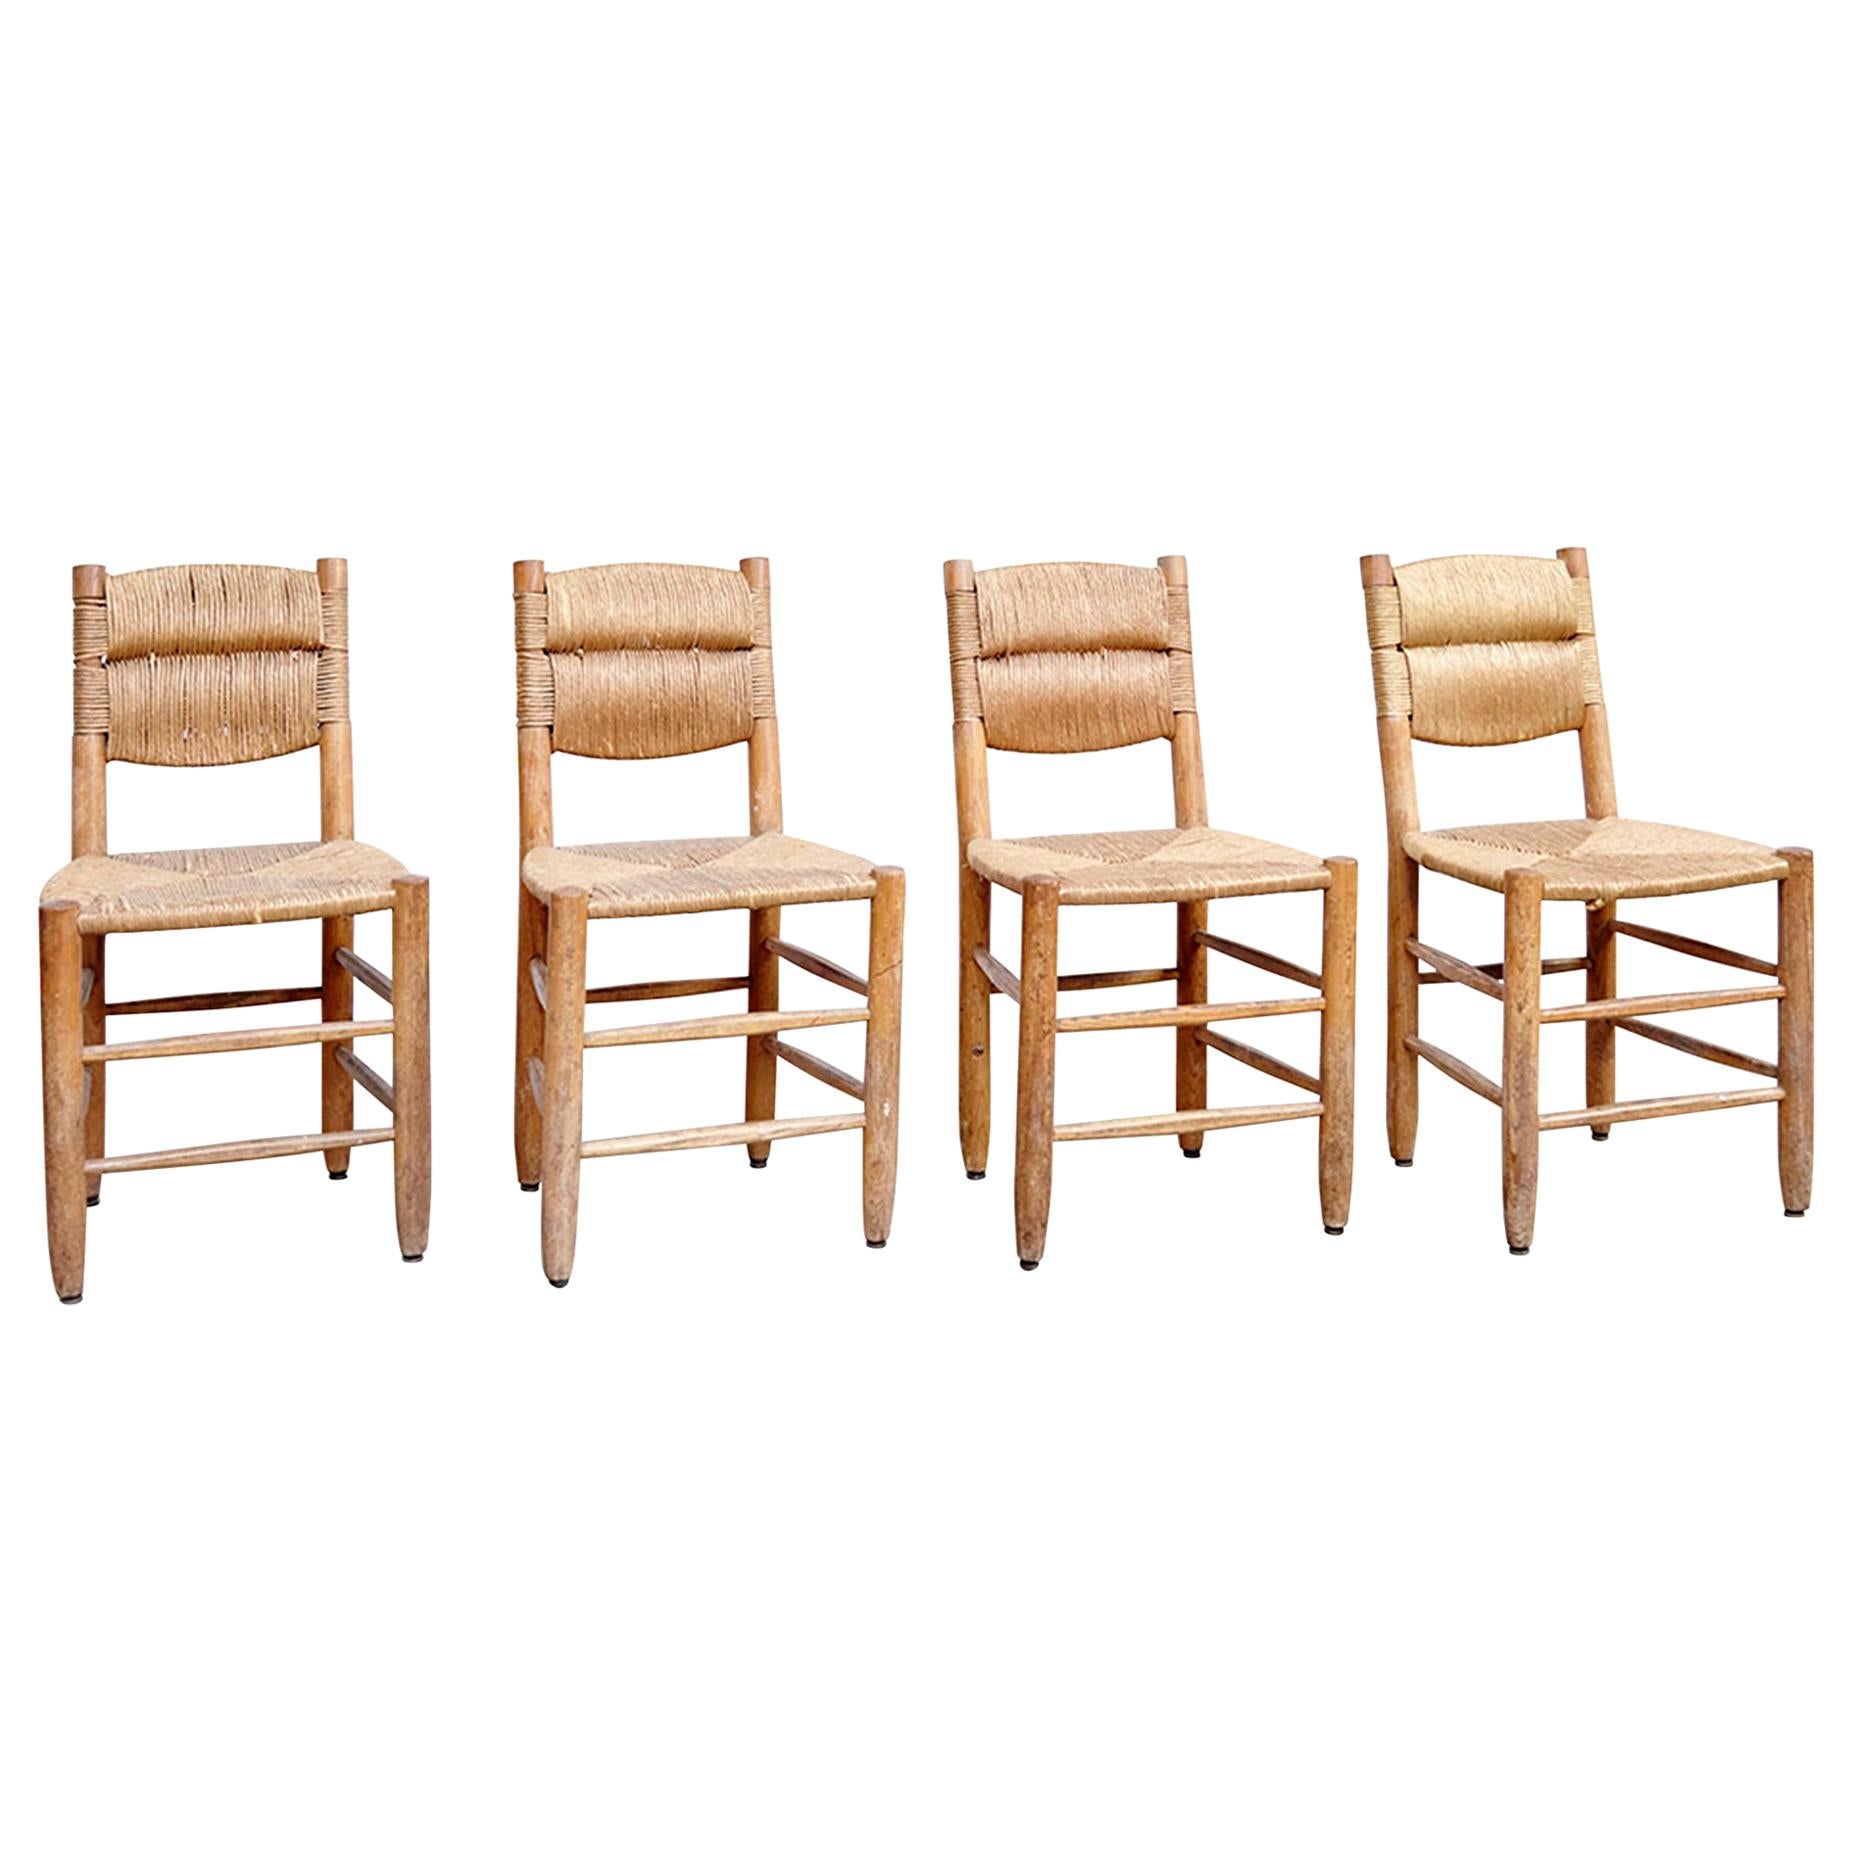 Set of four chairs designed by Charlotte Perriand, circa 1950.
Manufactured in France.

In good original condition, with minor wear consistent with age and use, preserving a beautiful patina. 

Charlotte Perriand (1903-1999) she was born in